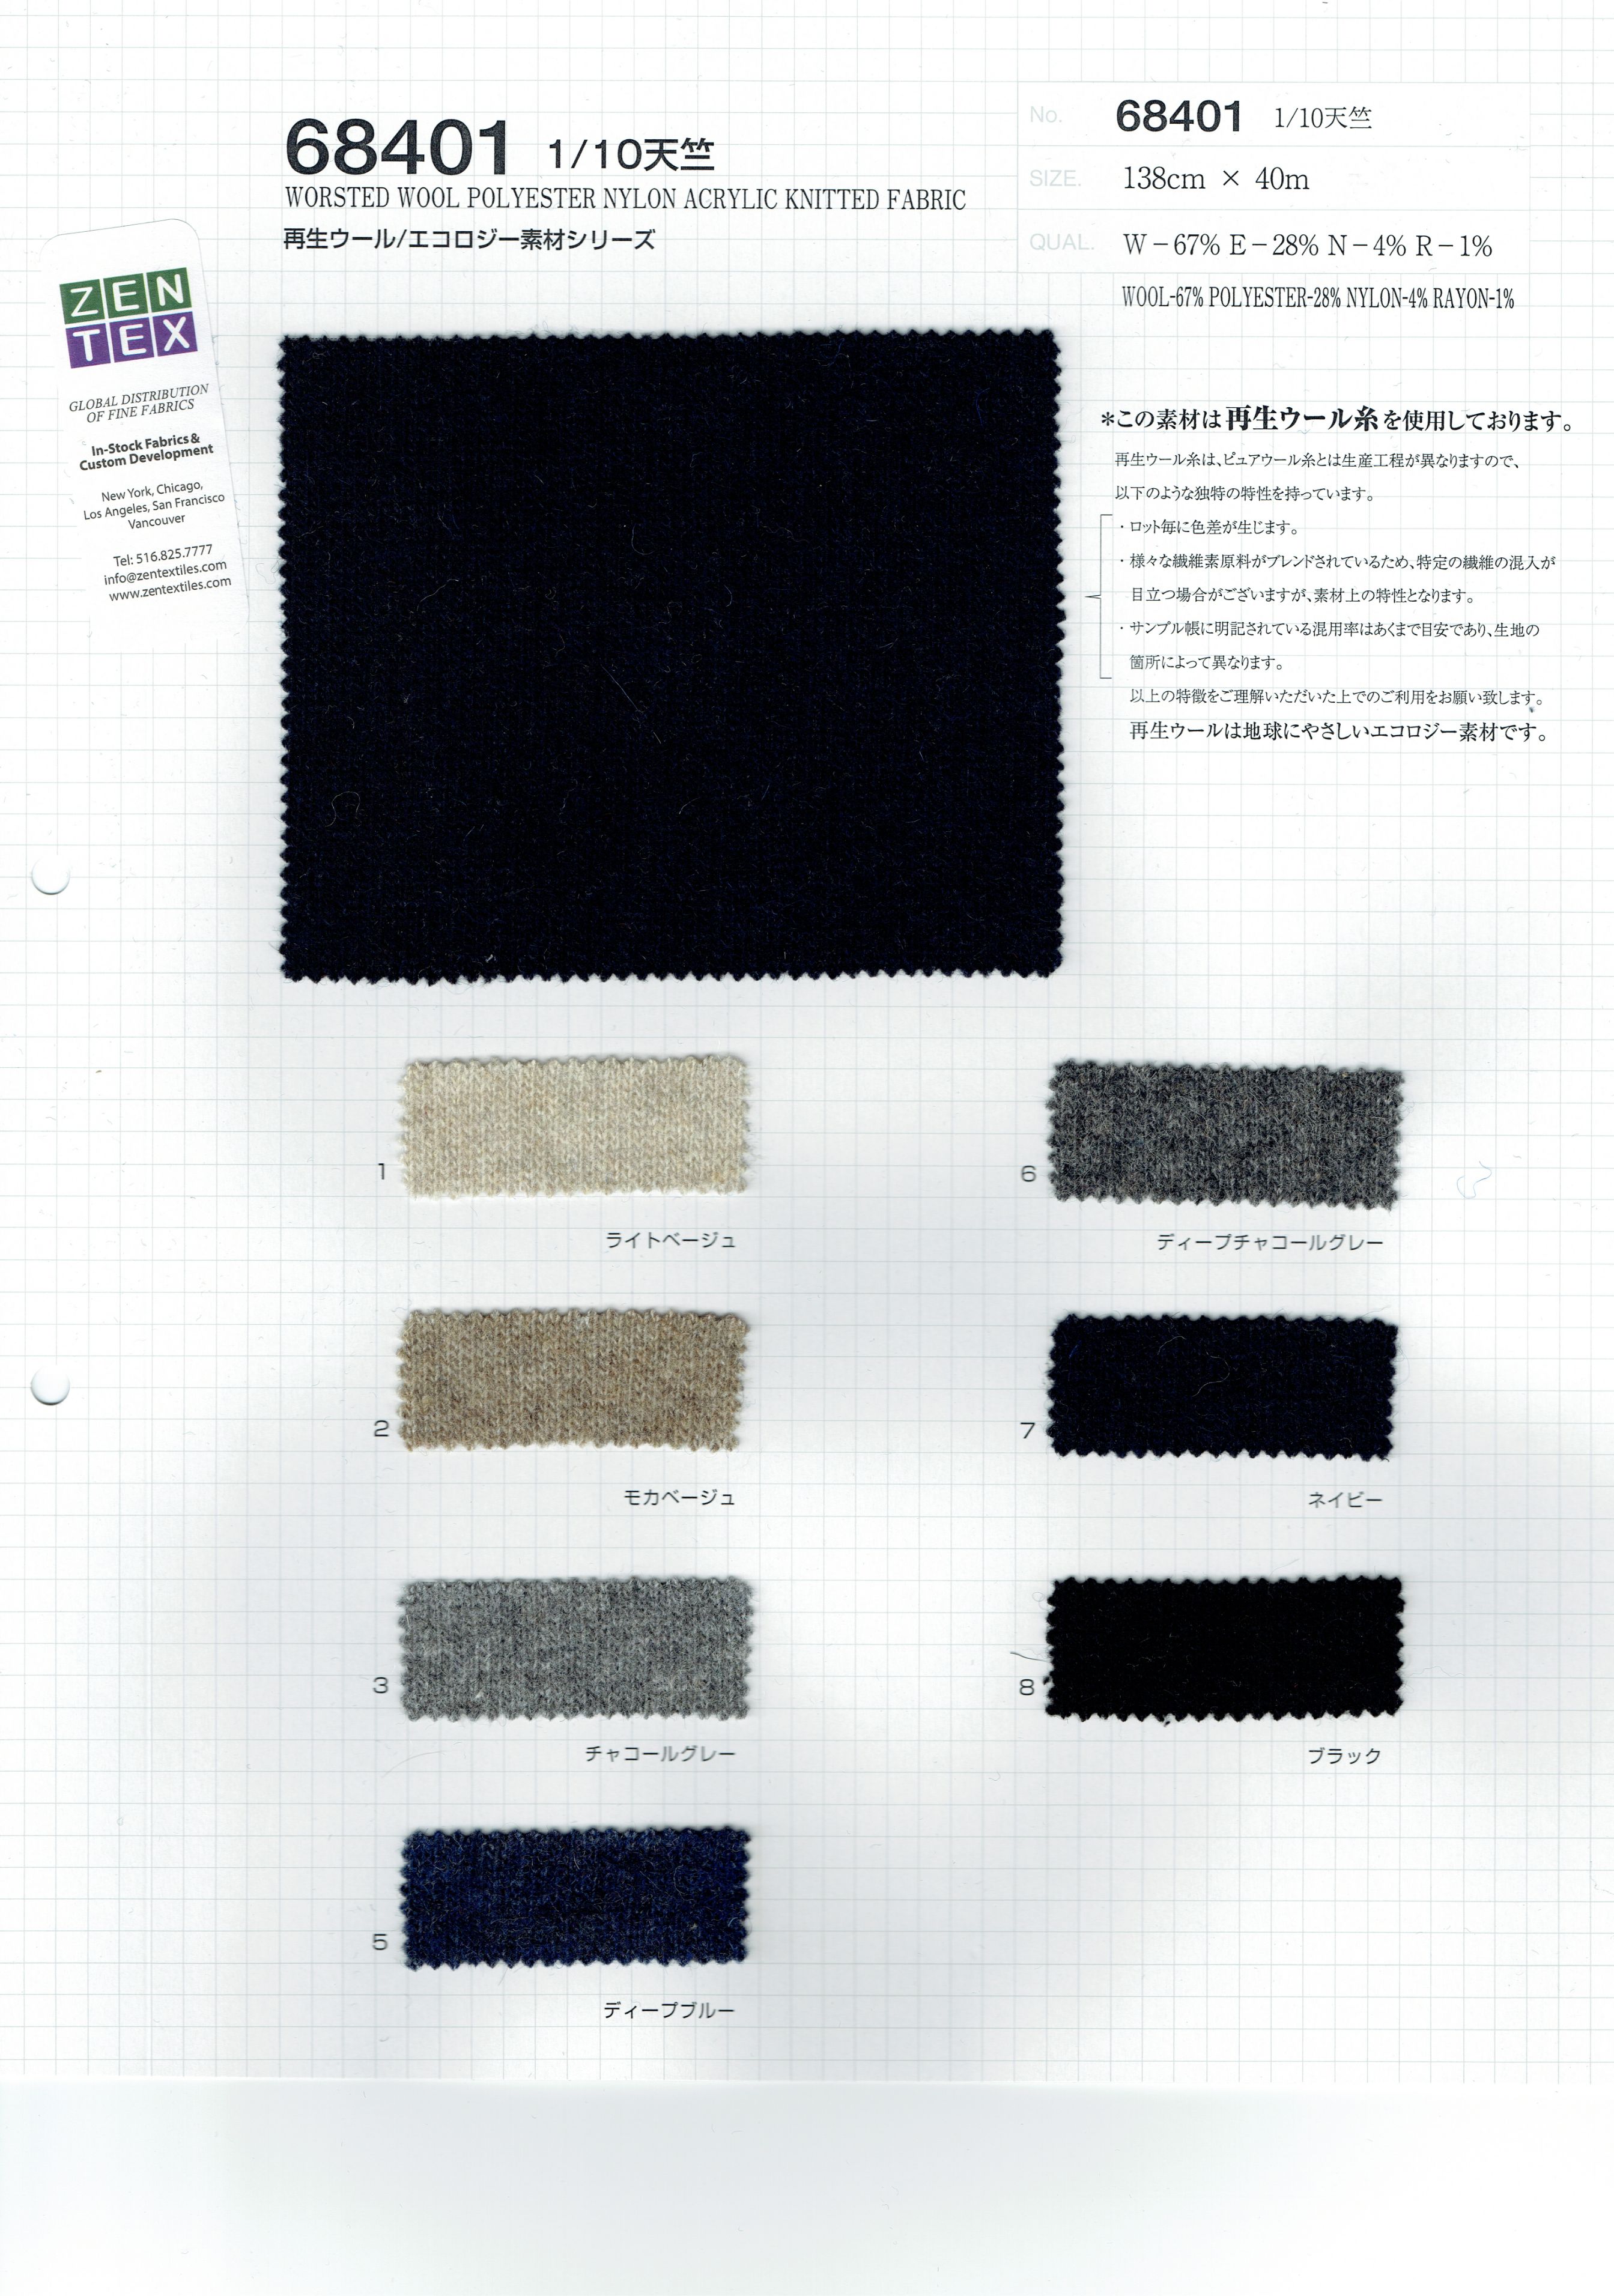 View 67% WOOLEN WOOL 28% POLYESTER 4% NYLON 1% RAYON KNITTED FABRIC